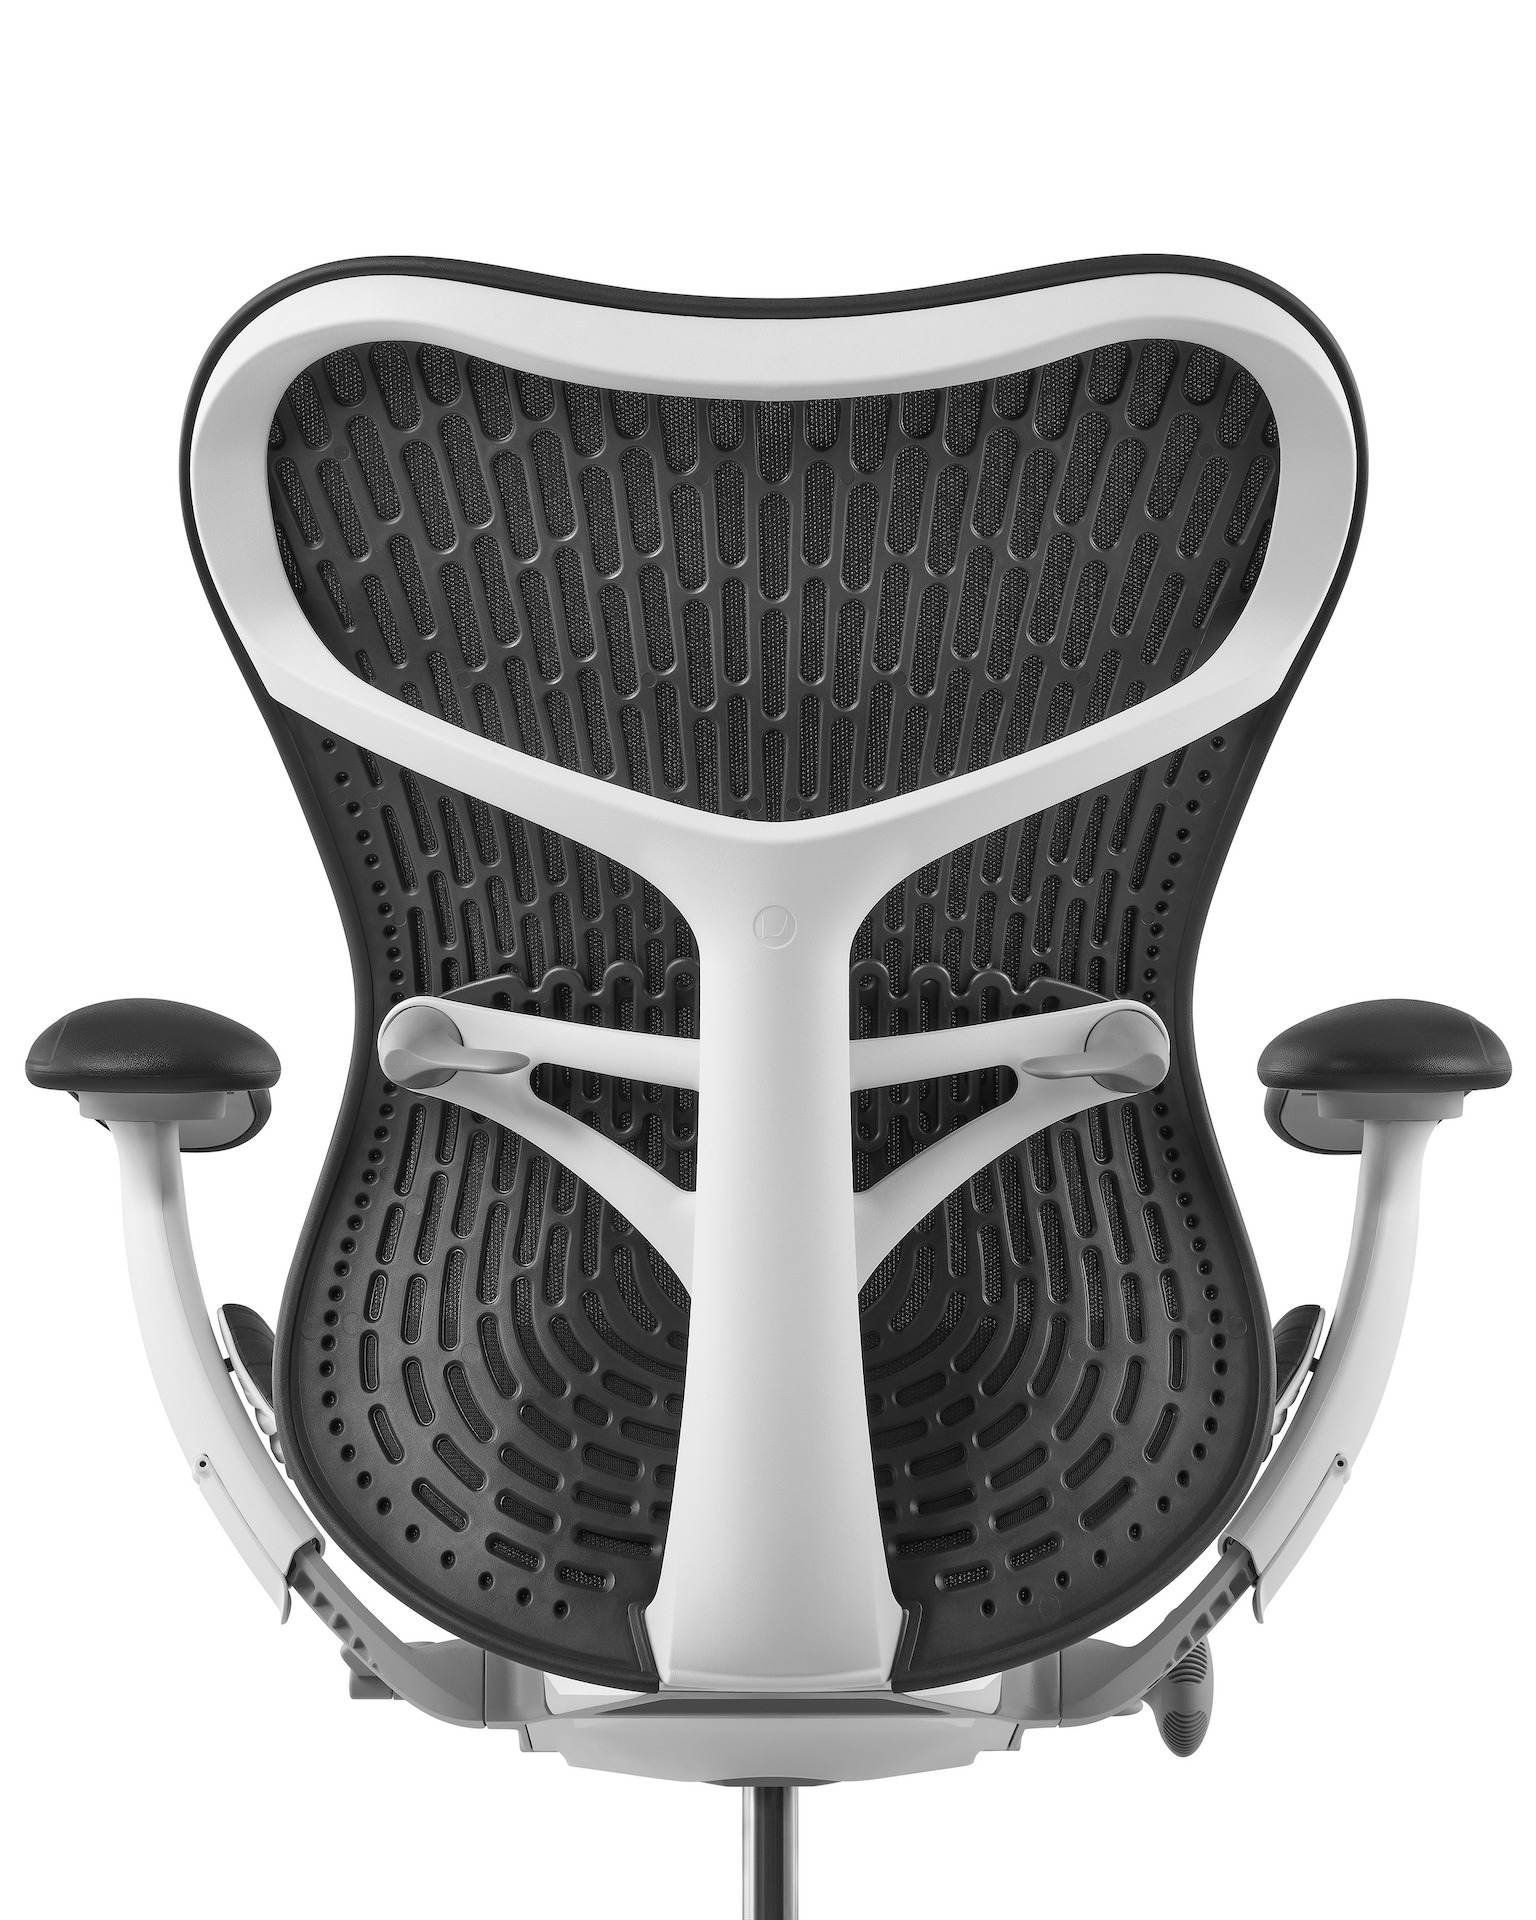 Back view of a Mirra 2 Chair in dark grey with white frame.